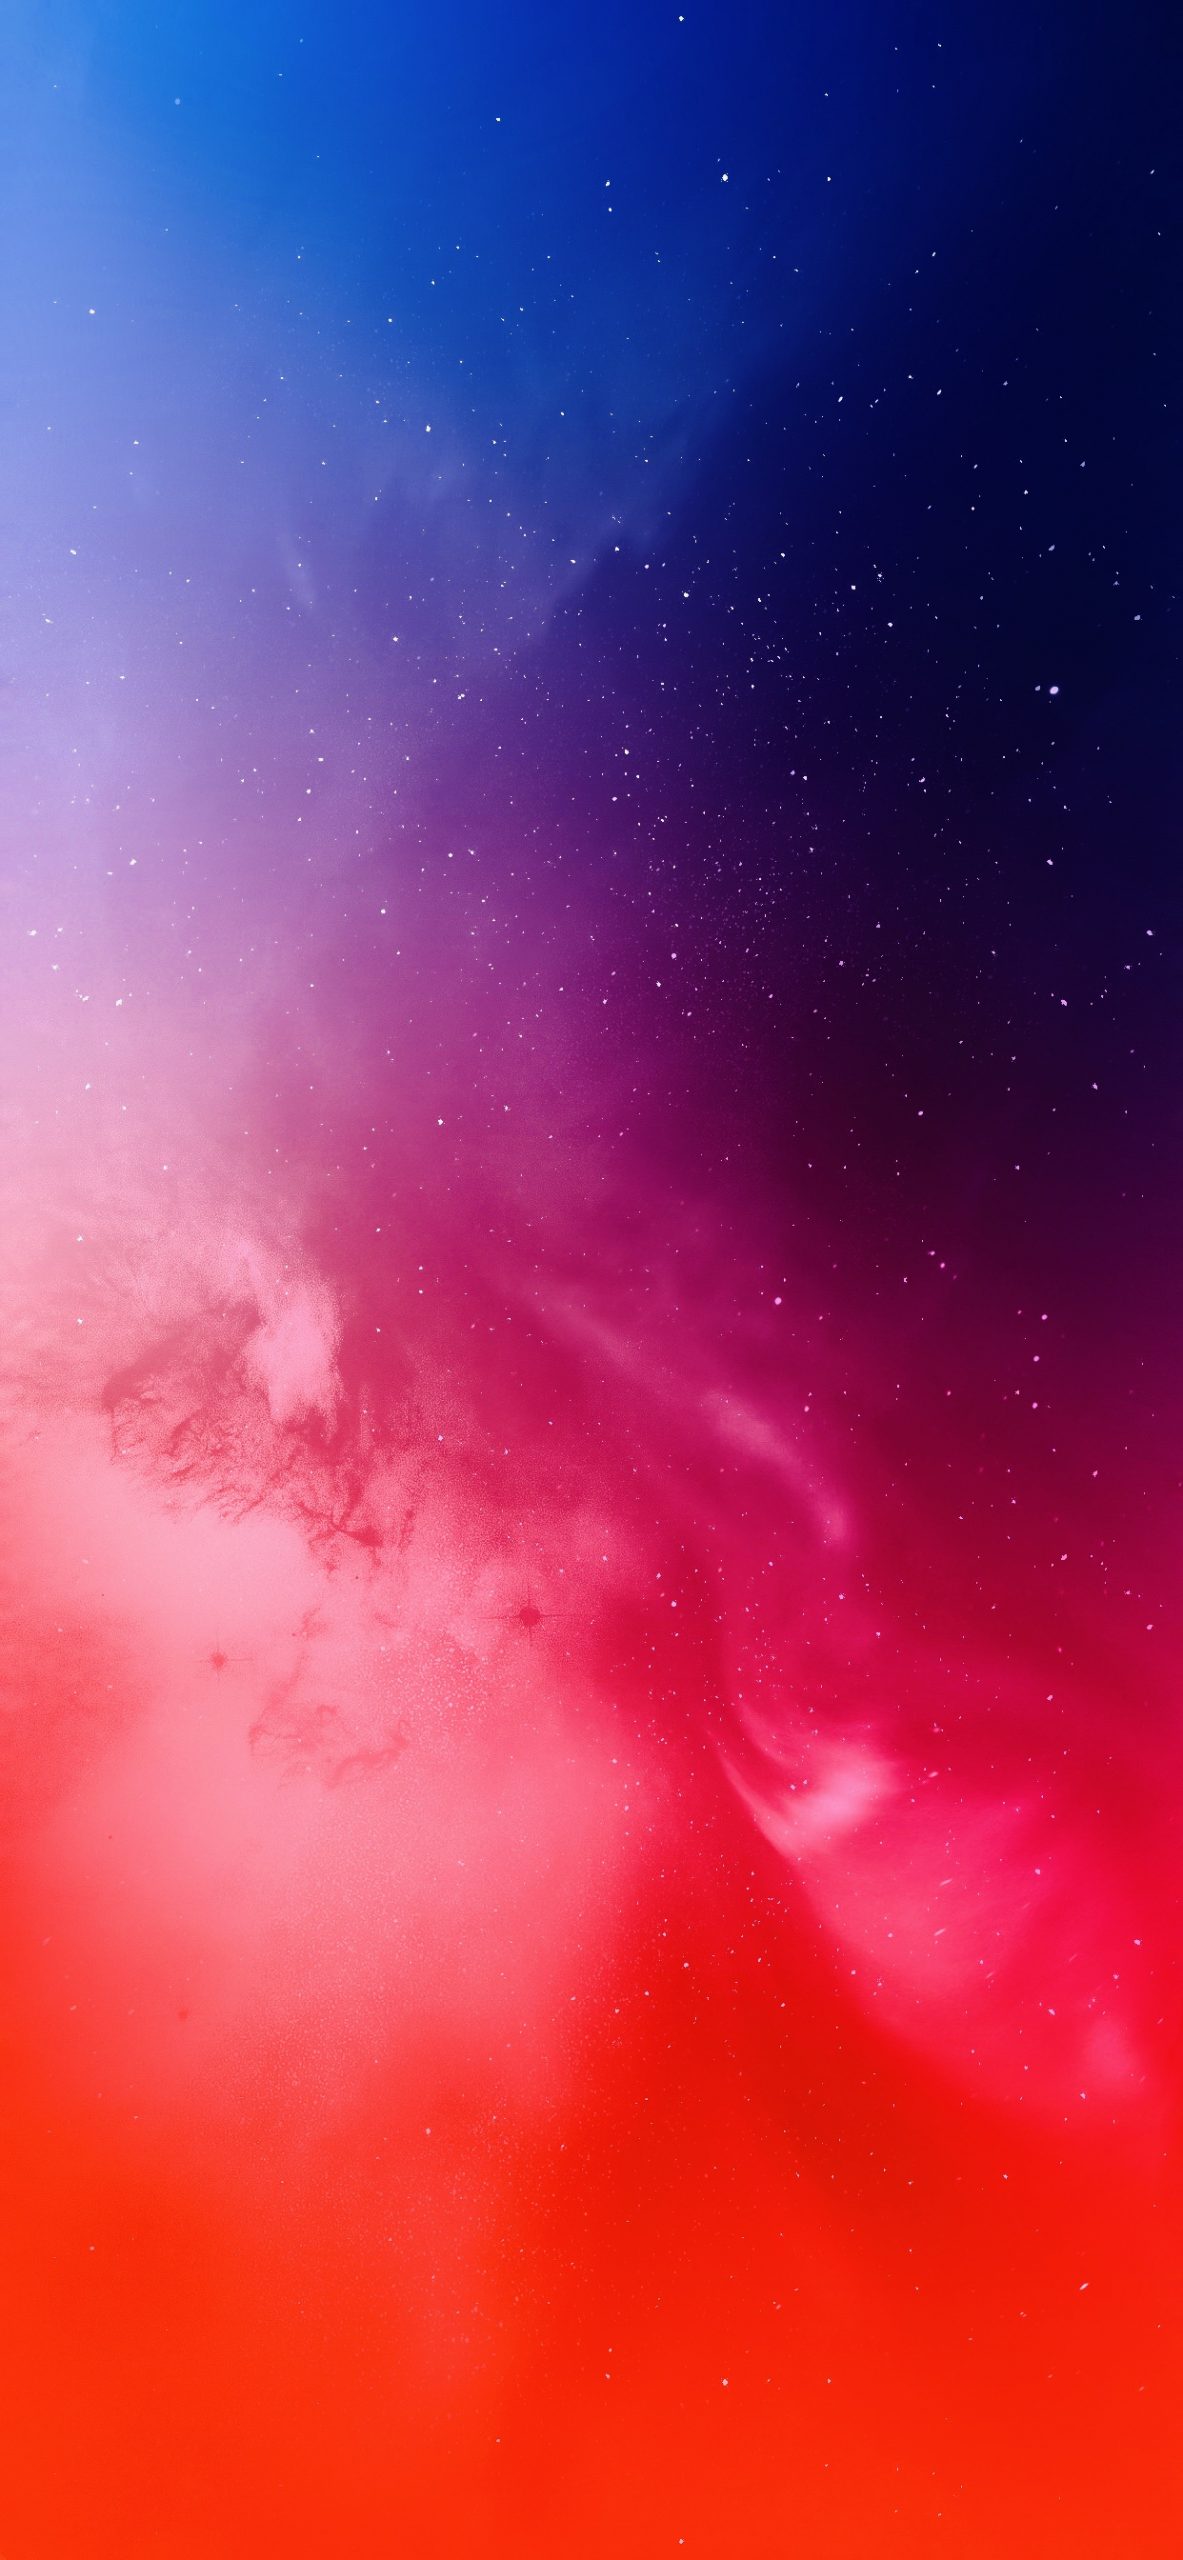 Space Fantasy iPhone Wallpaper iPhone 11 Pro Max iDownloadBlog AR72014 blue red